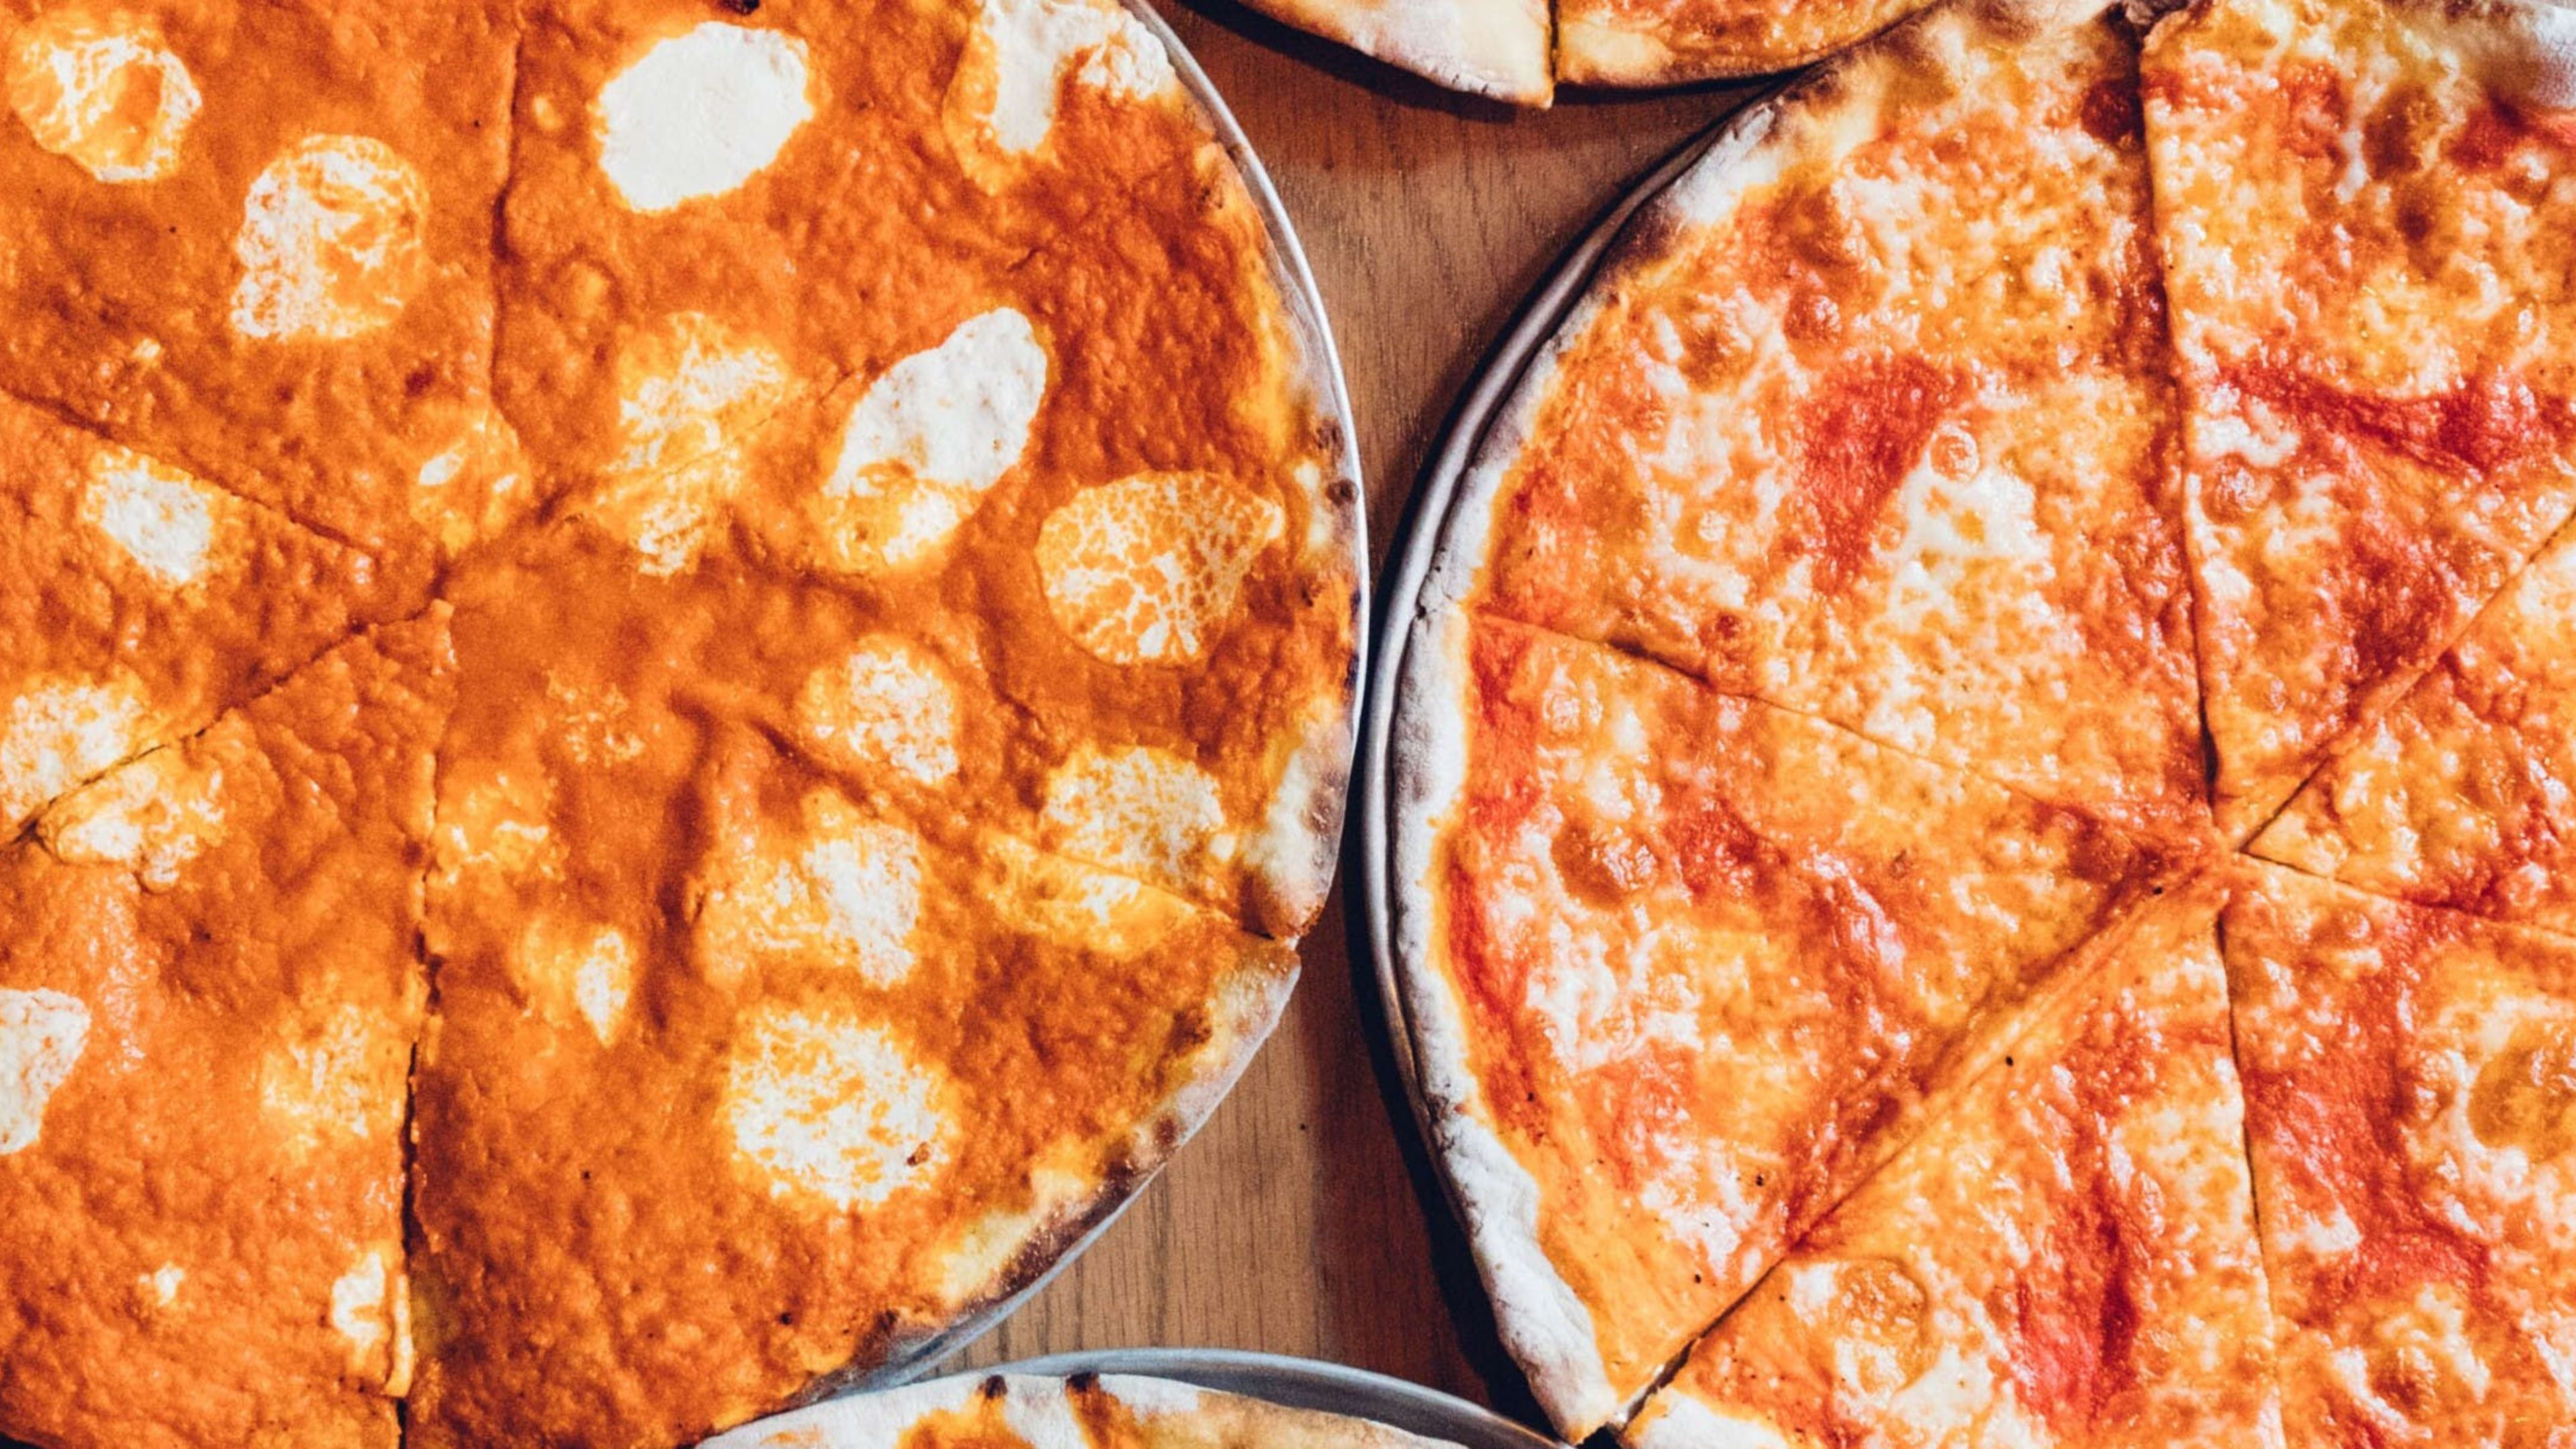 Where To Get Pizza Delivery In NYC image